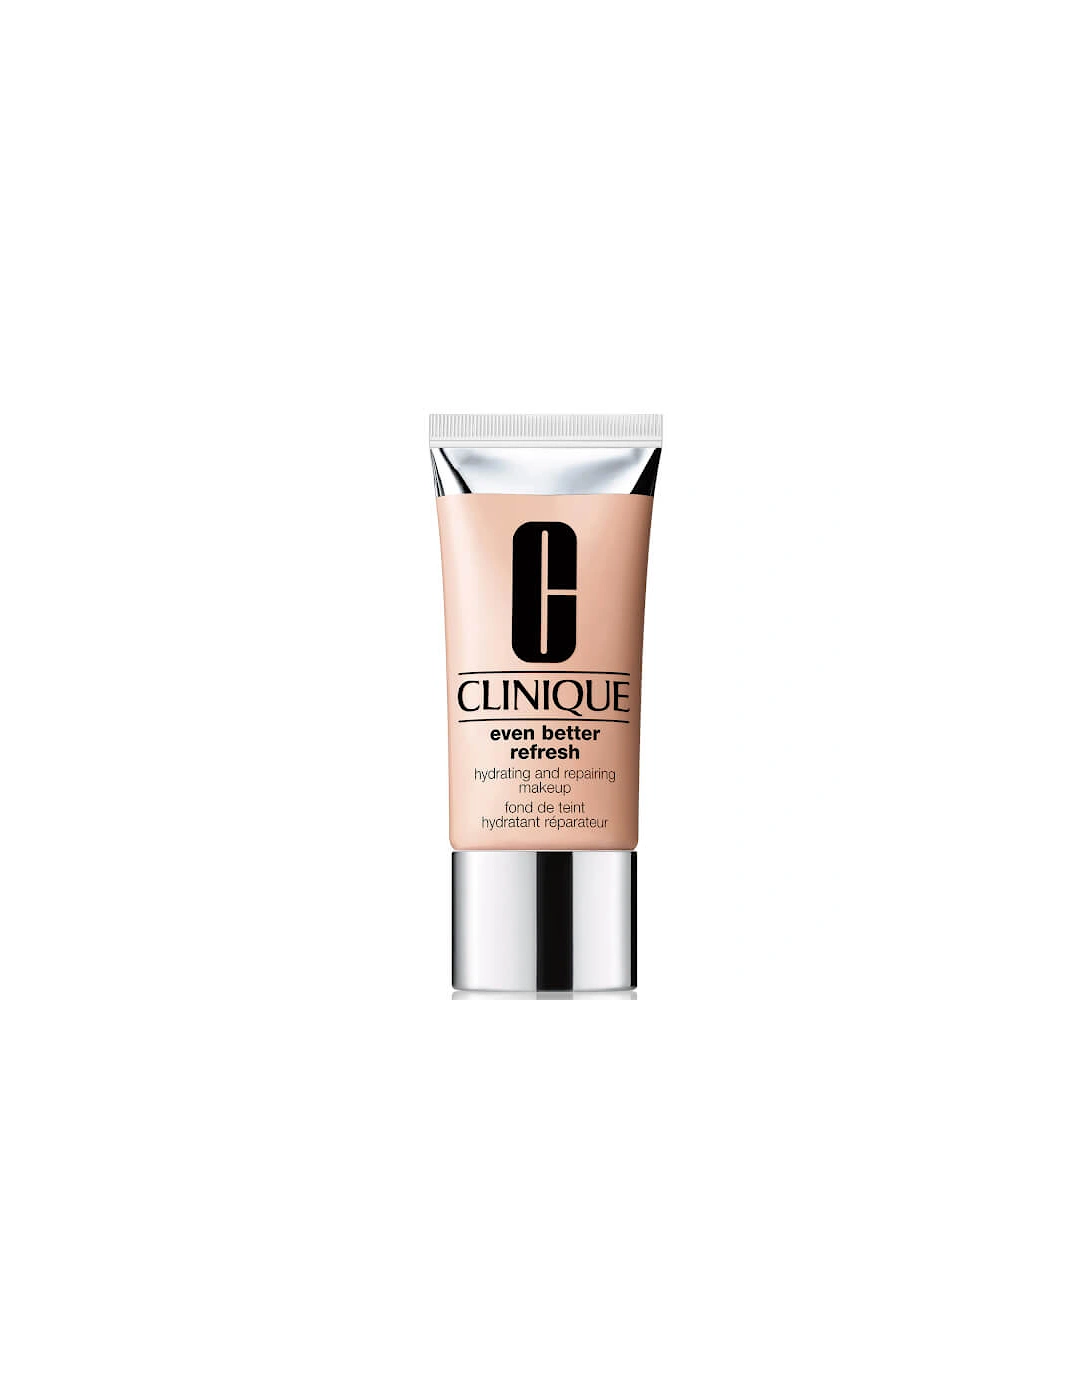 Even Better Refresh Hydrating and Repairing Makeup - CN 29 Bisque, 2 of 1